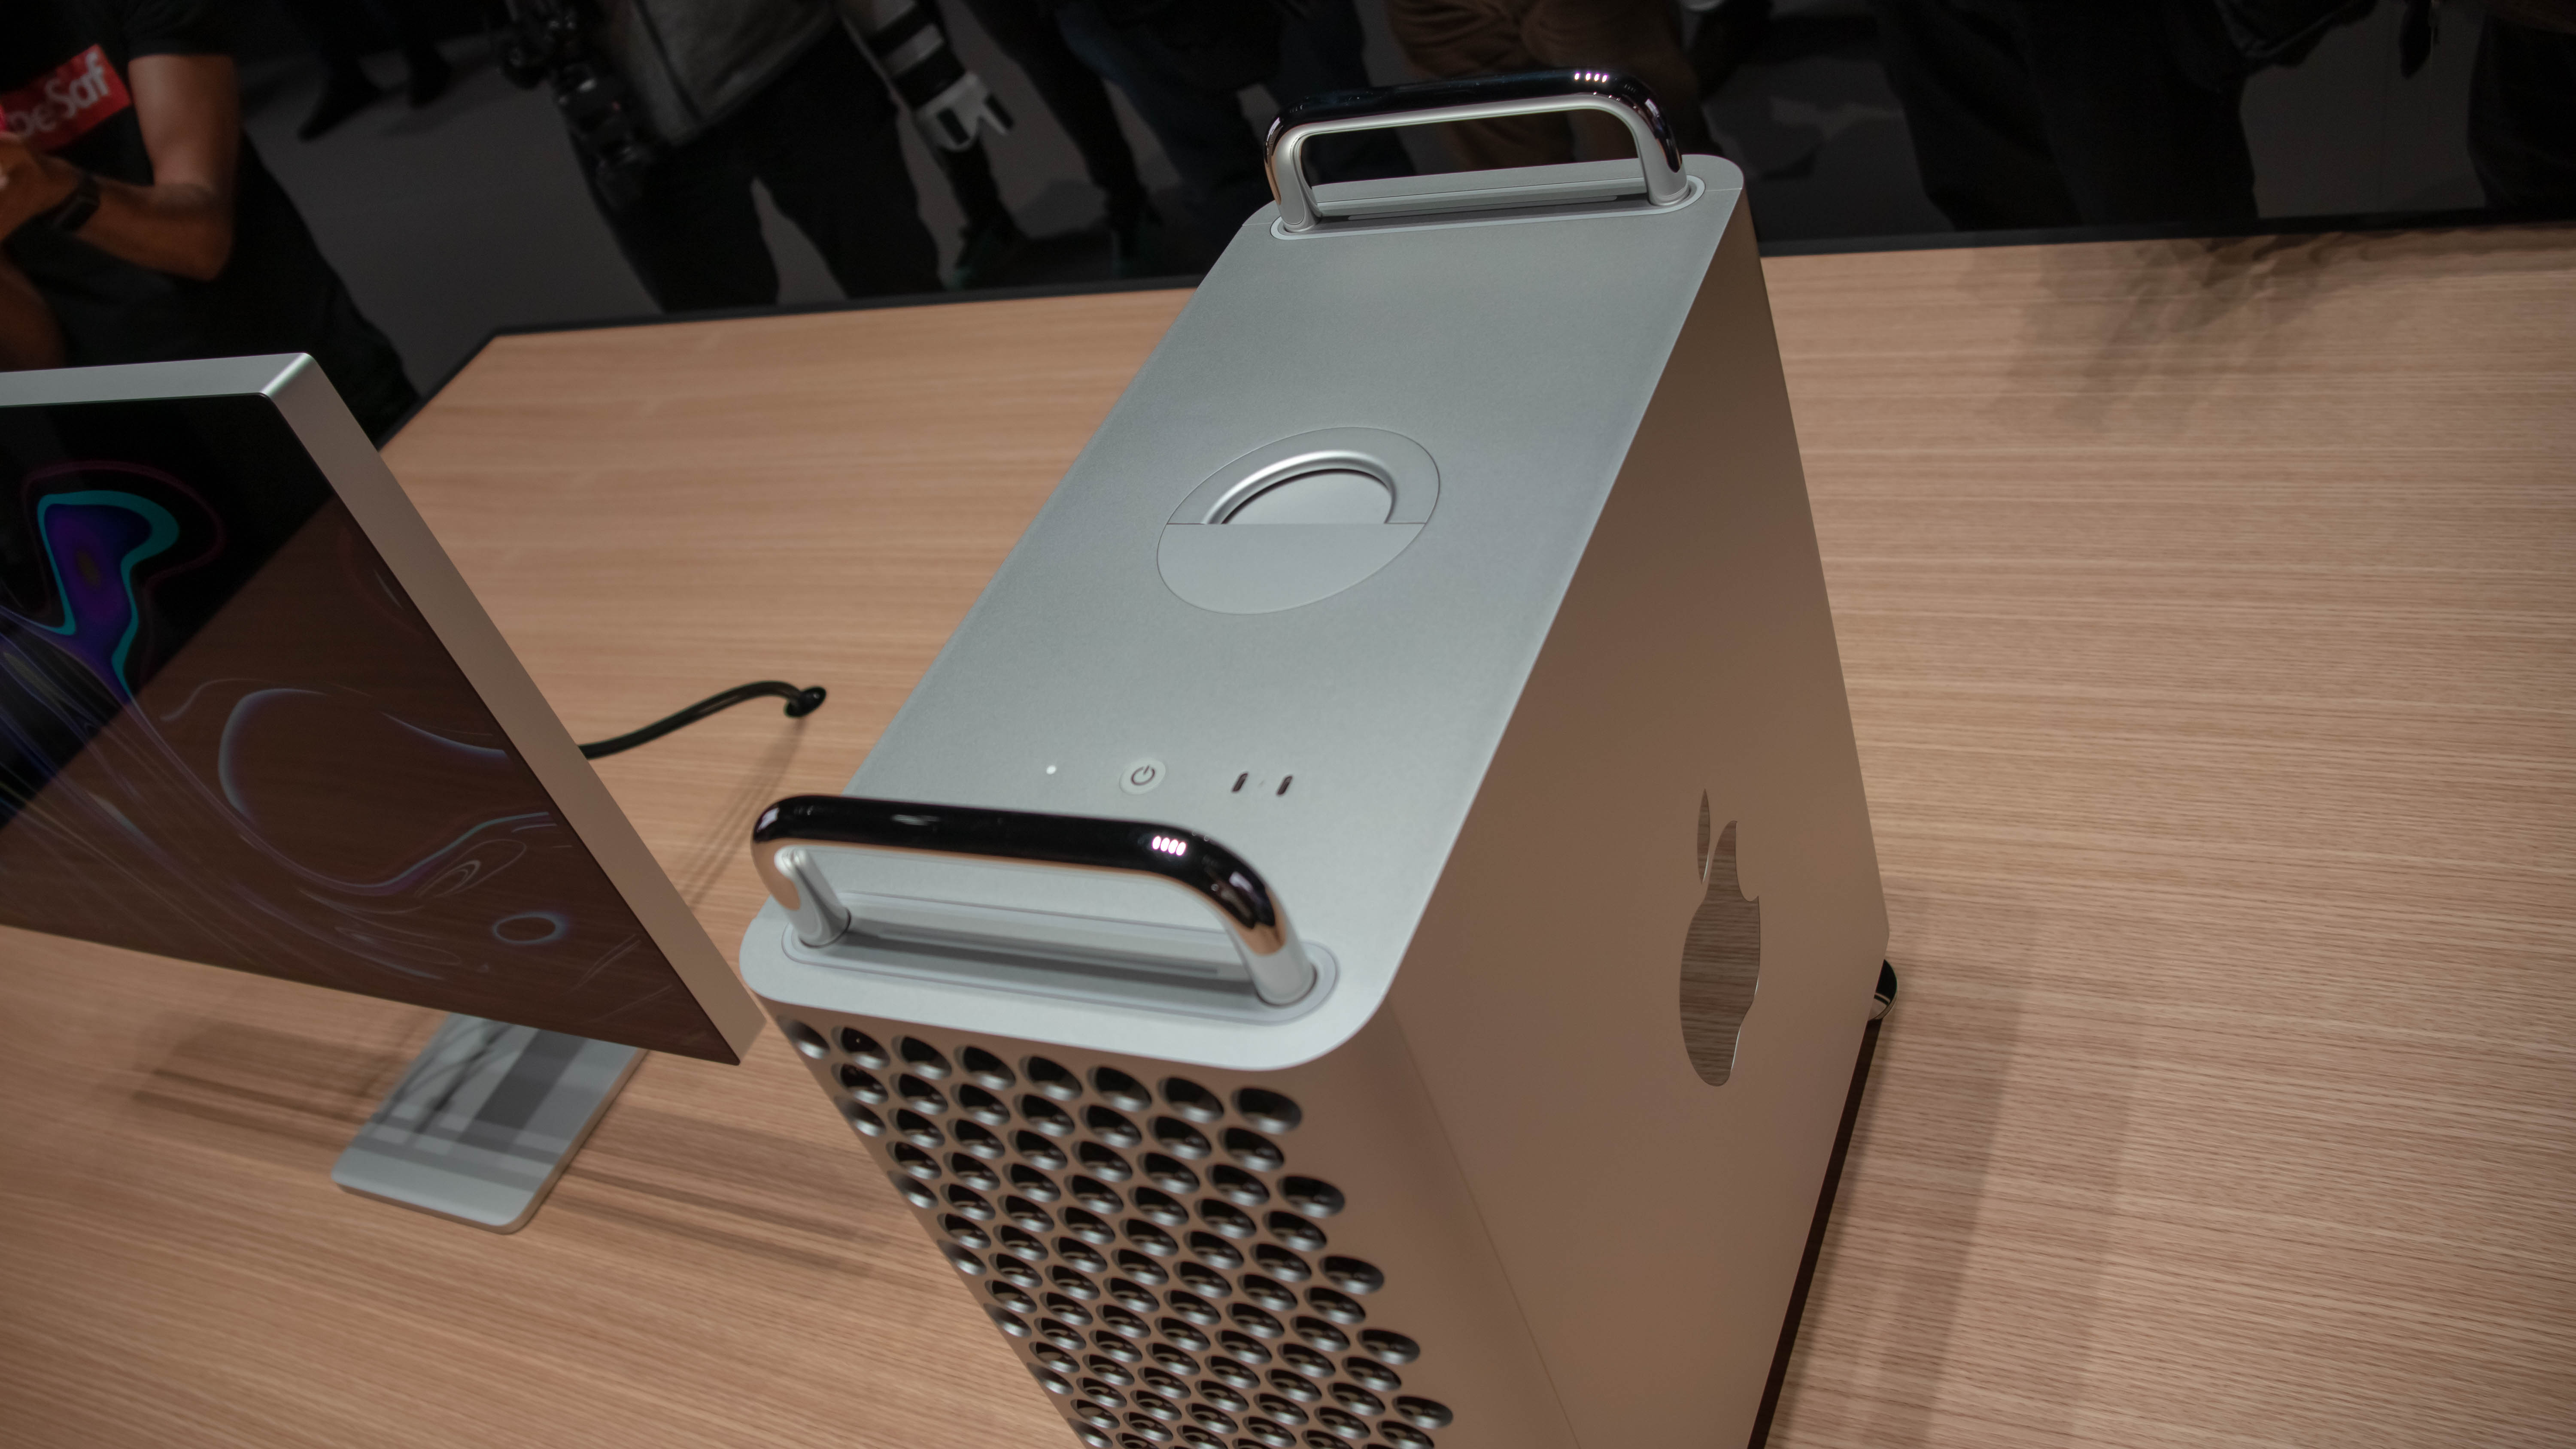 Mac Pro 2019's removable cover